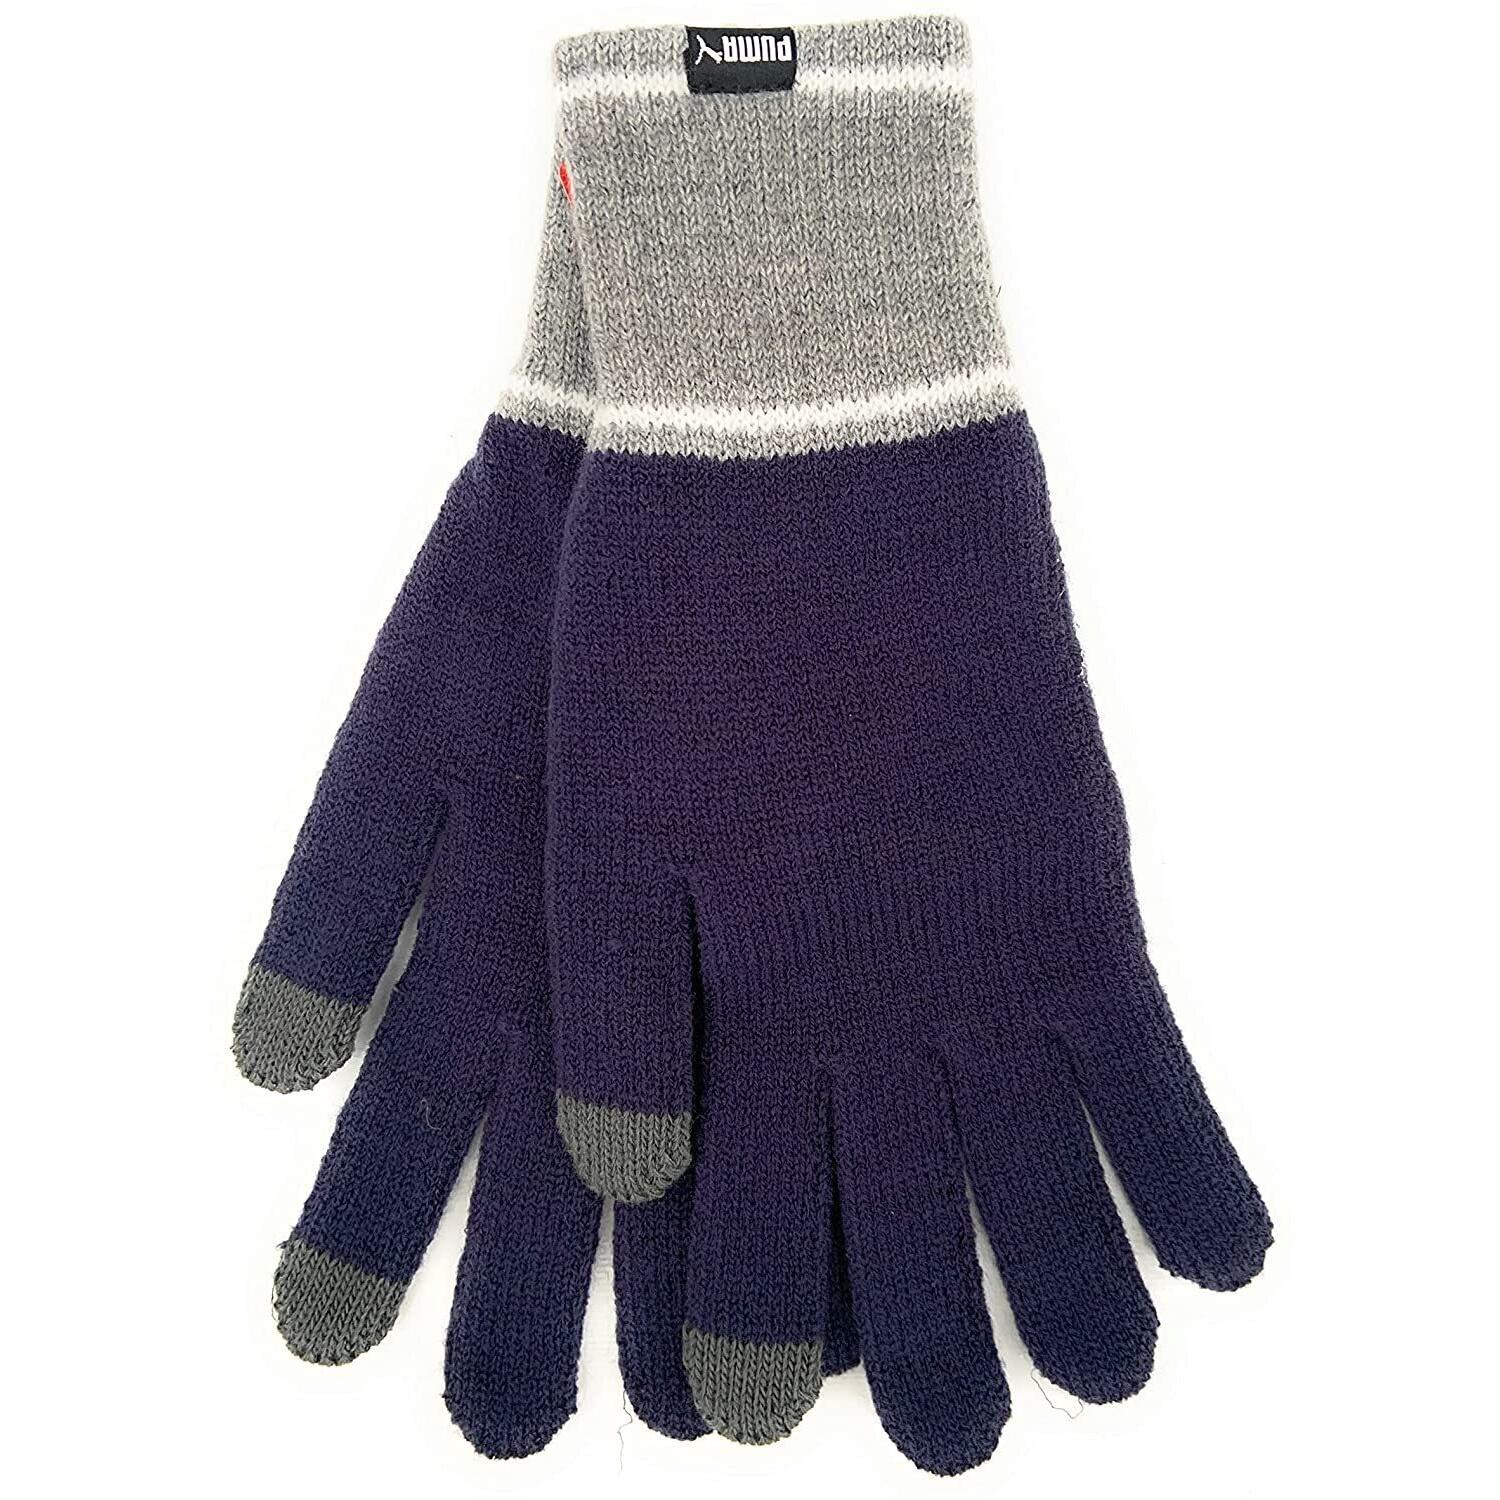 Unisex Adult Knitted Winter Gloves (Peacoat/Grey Heather) 3/3